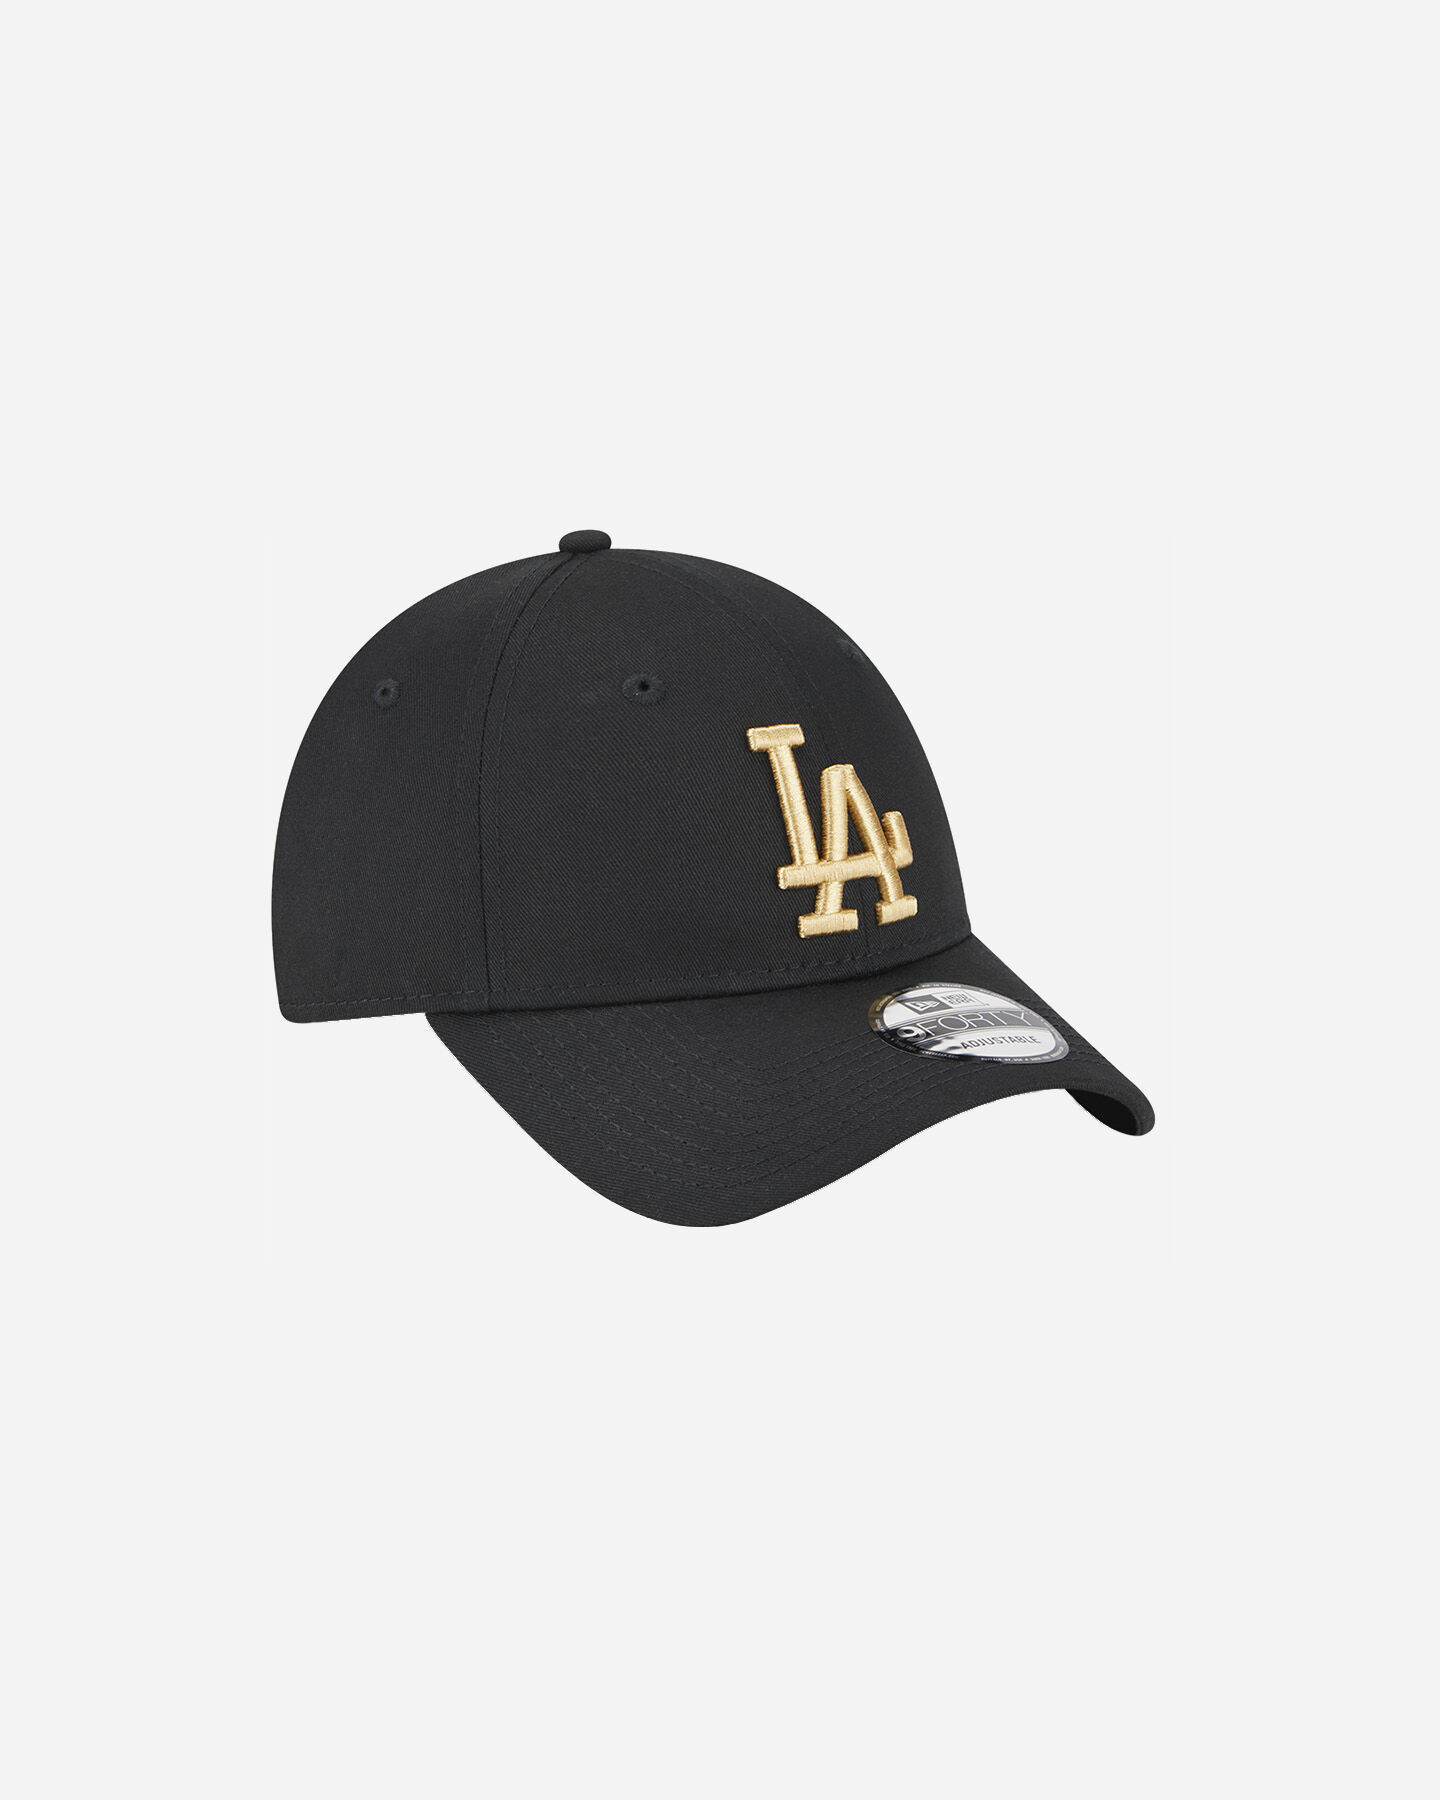  Cappellino NEW ERA 9FORTY MLB LEAGUE LOS ANGELES DODGERS  S5630967|001|OSFM scatto 2